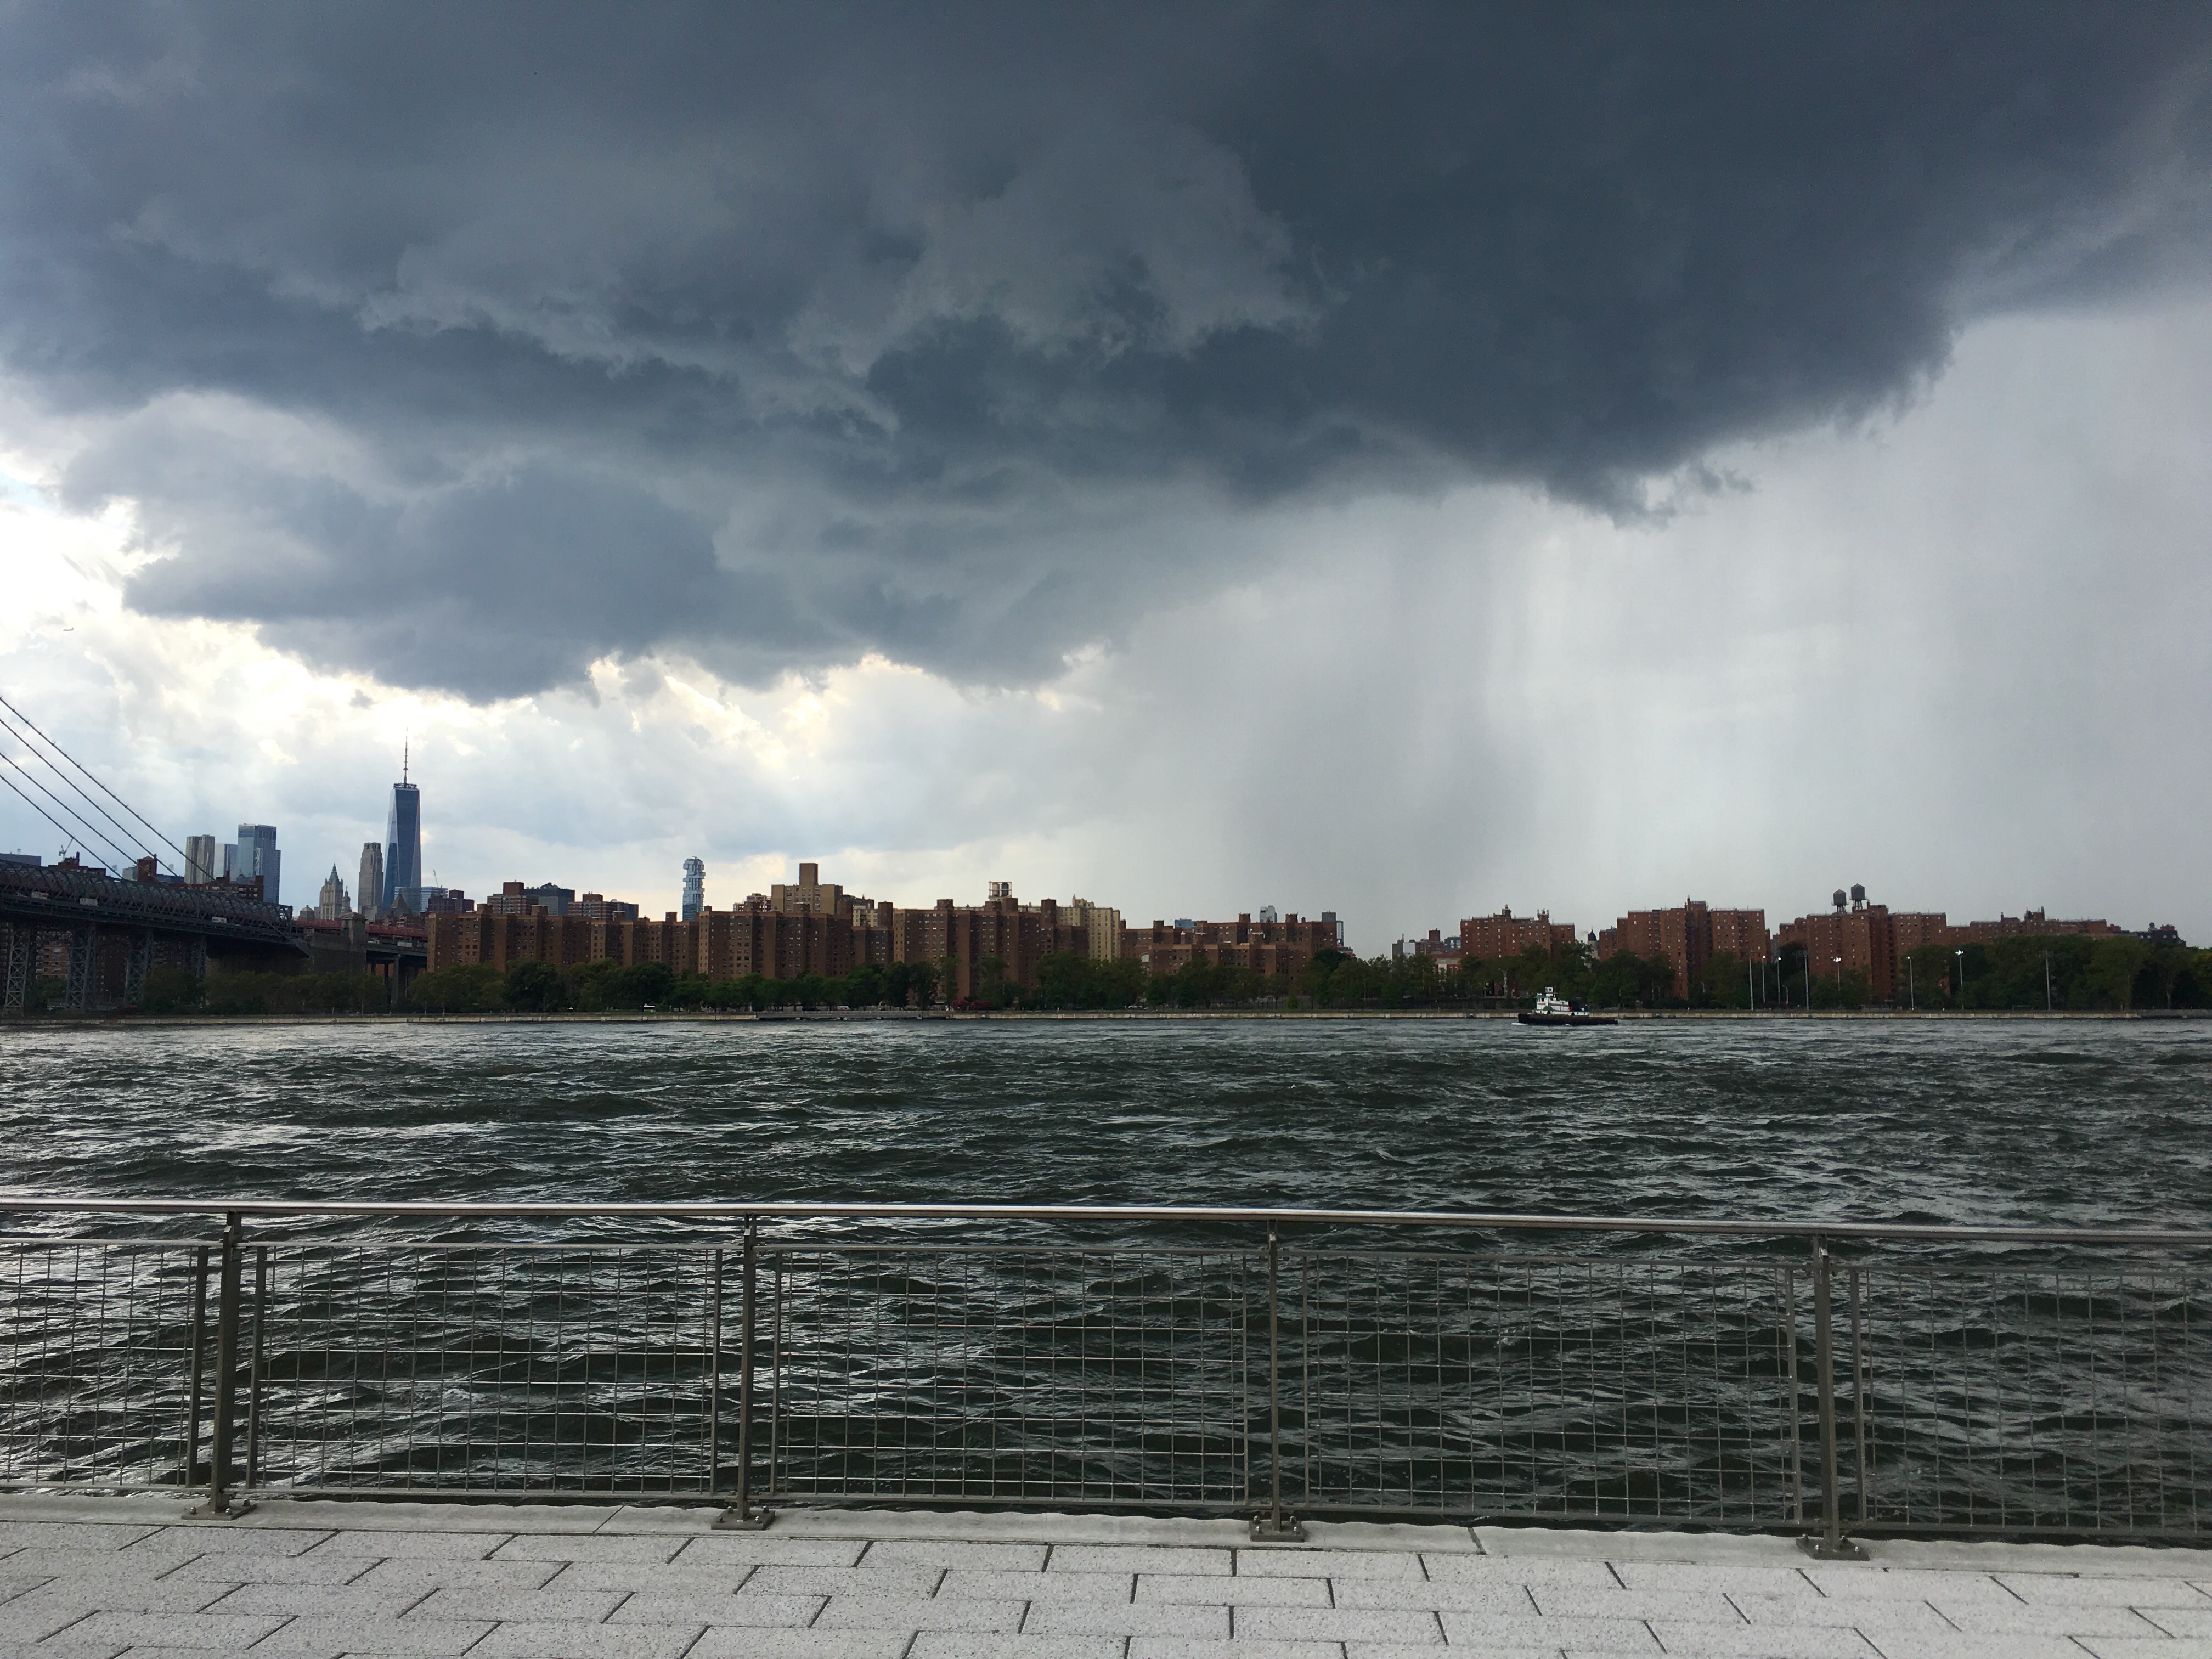 It’s raining, it’s pouring … across the river from Domino Park. Eagle photo by Lore Croghan